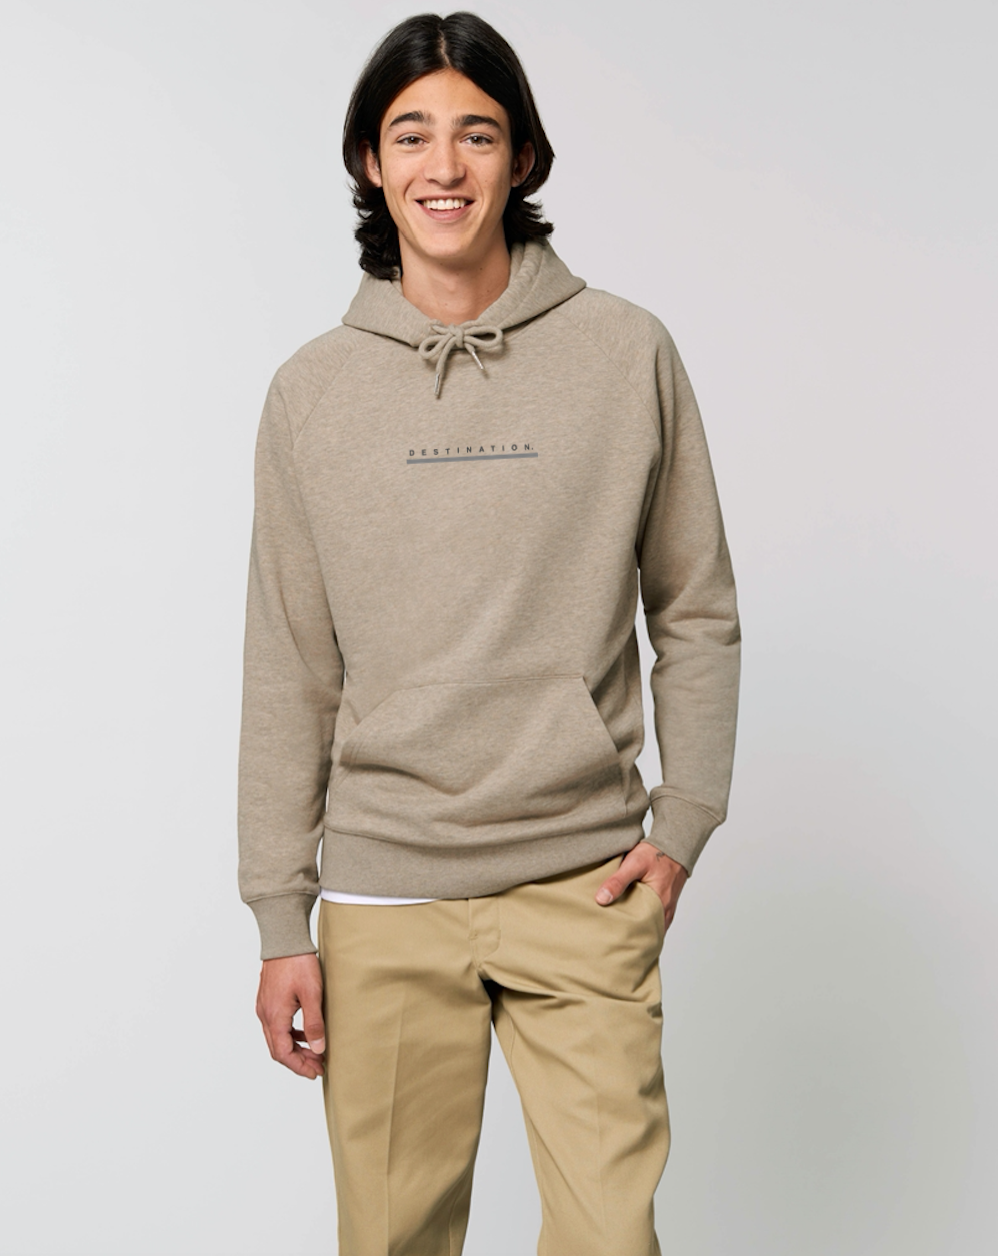 Unisex Hoodie - 100% of profits donated to Disasters Emergency Committee